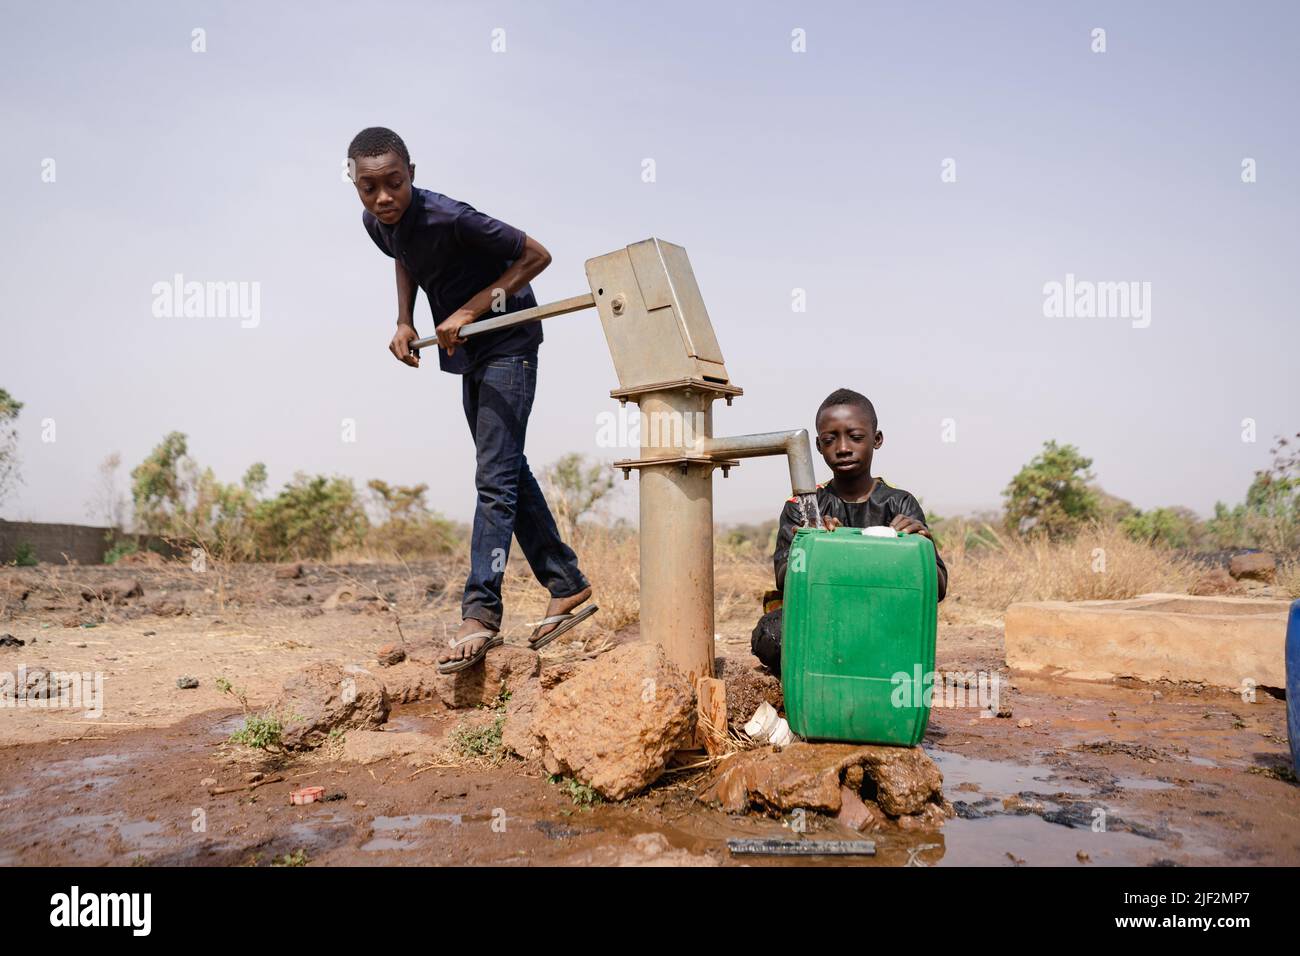 Two African boys busy filling water containers at a remote village pump; water scarcity in developing countries concept Stock Photo